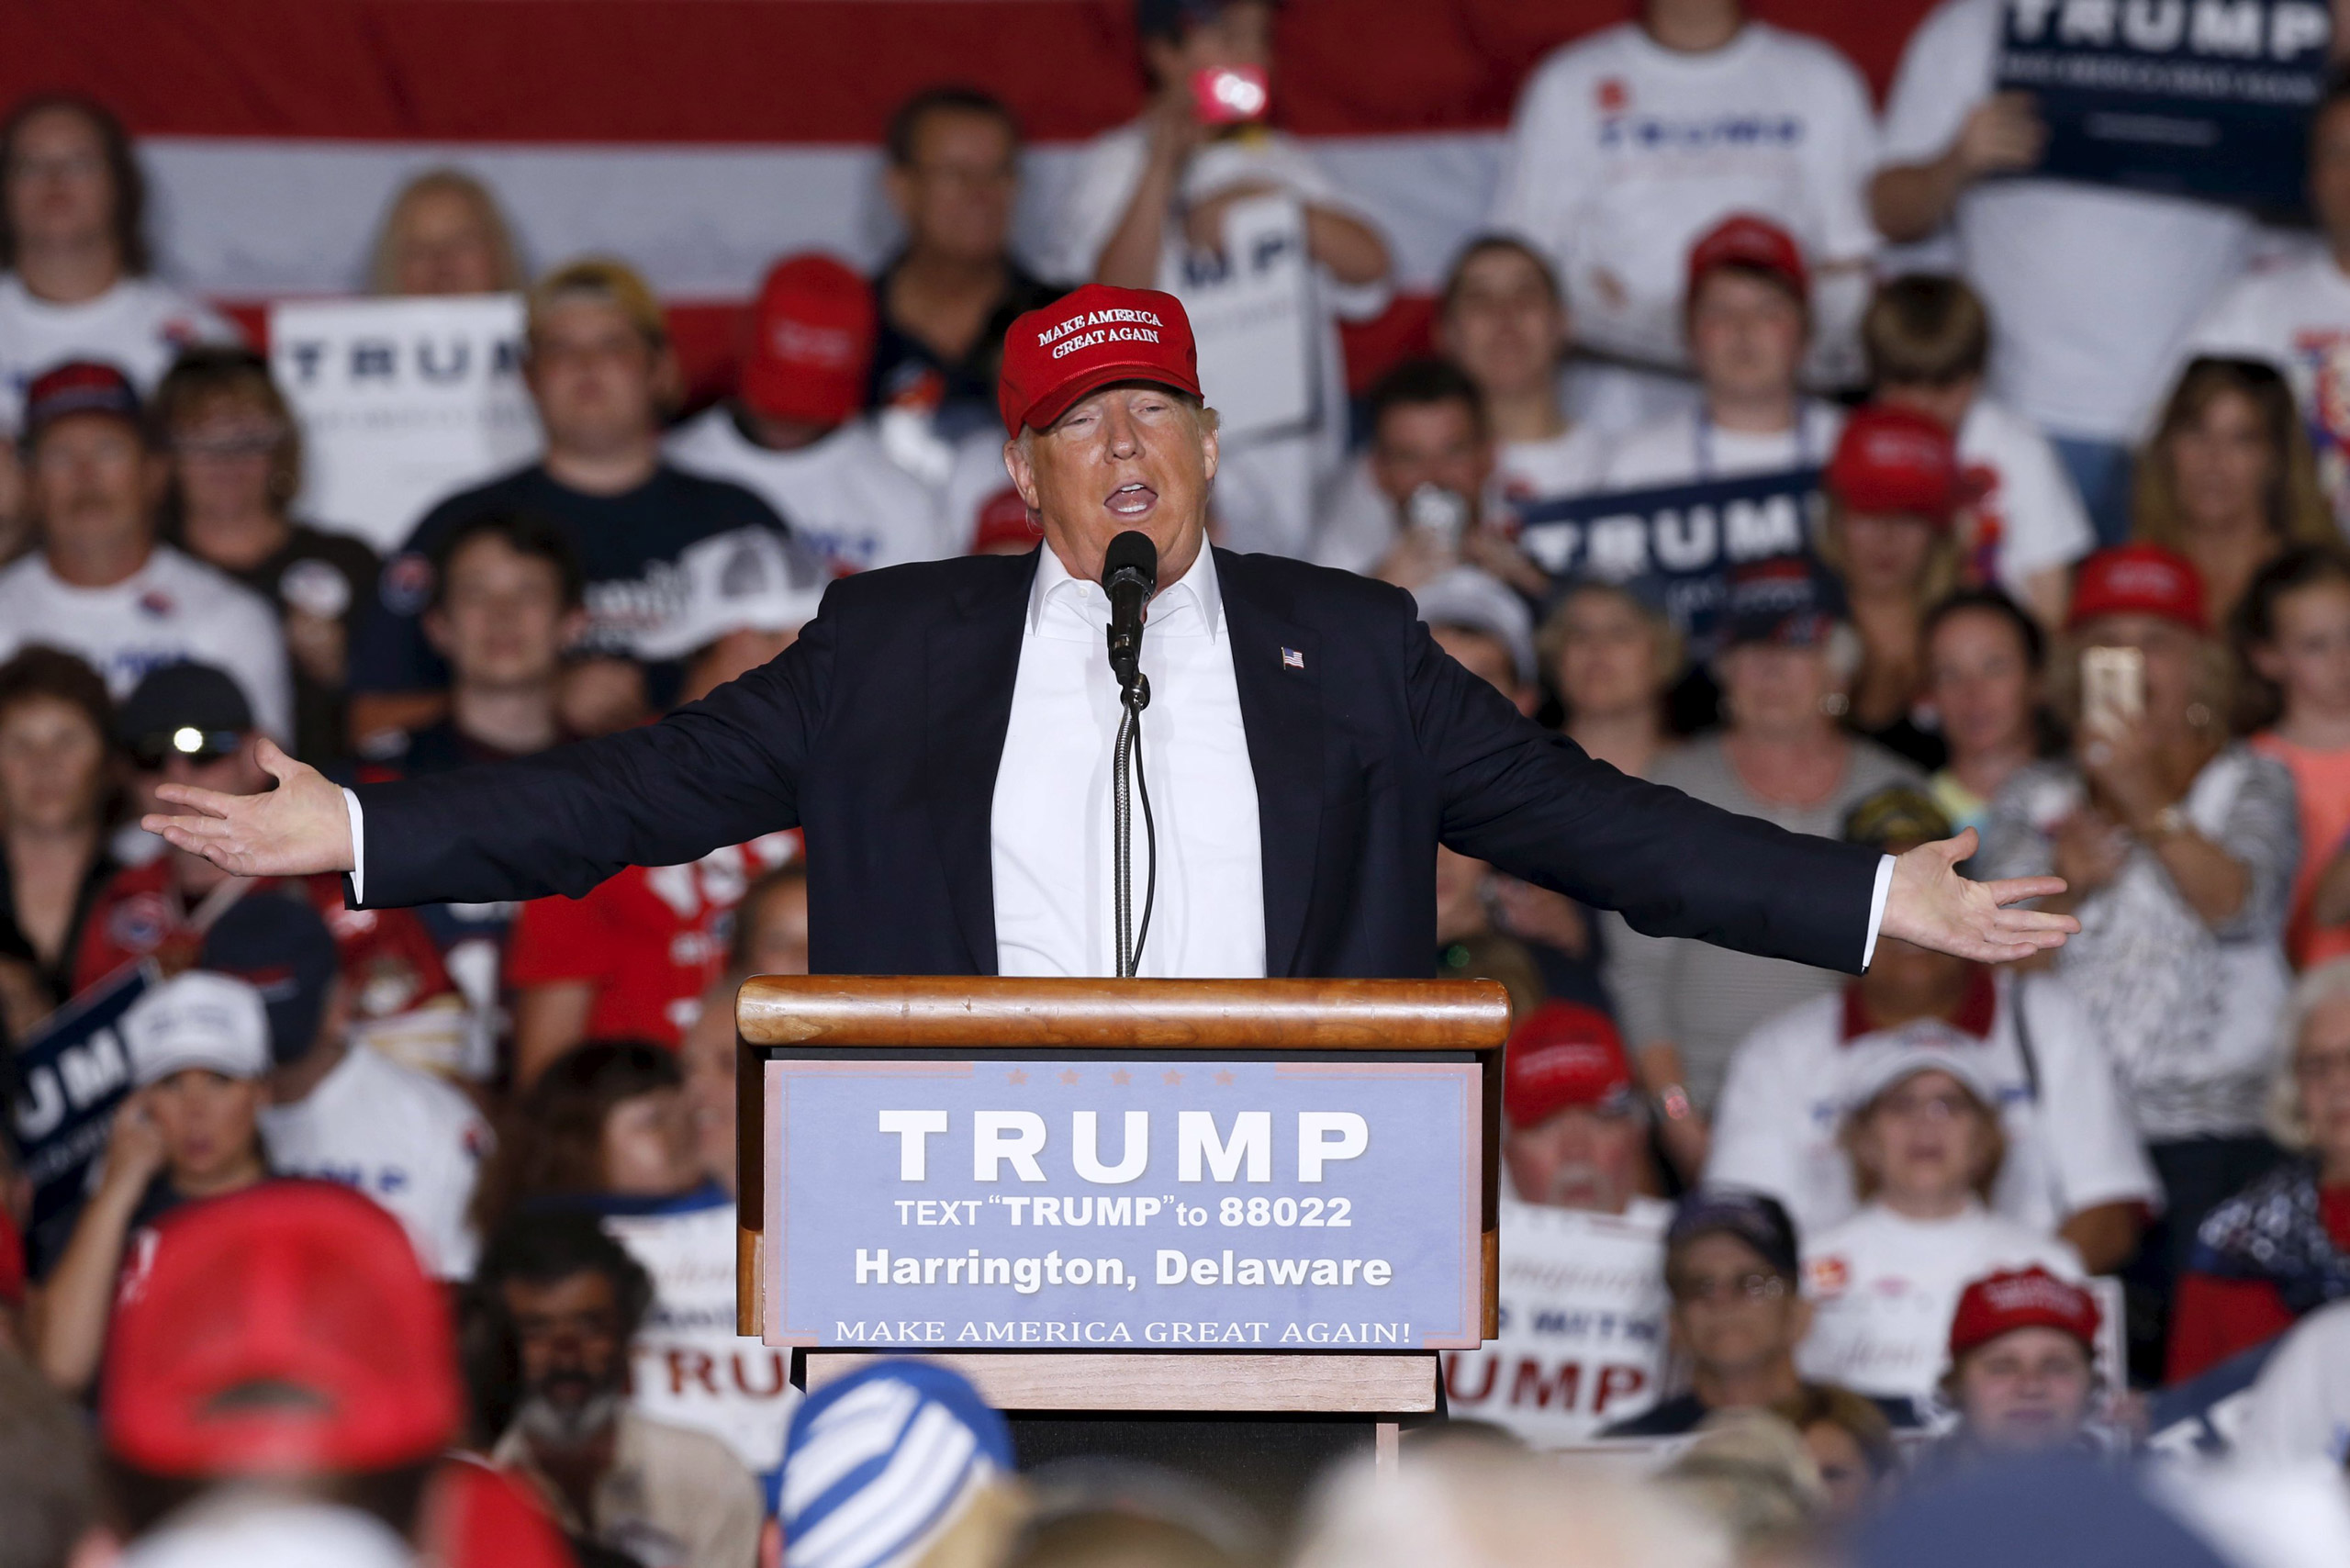 Republican presidential candidate Donald Trump holds a rally with supporters in Harrington, Delaware, U.S., April 22, 2016.